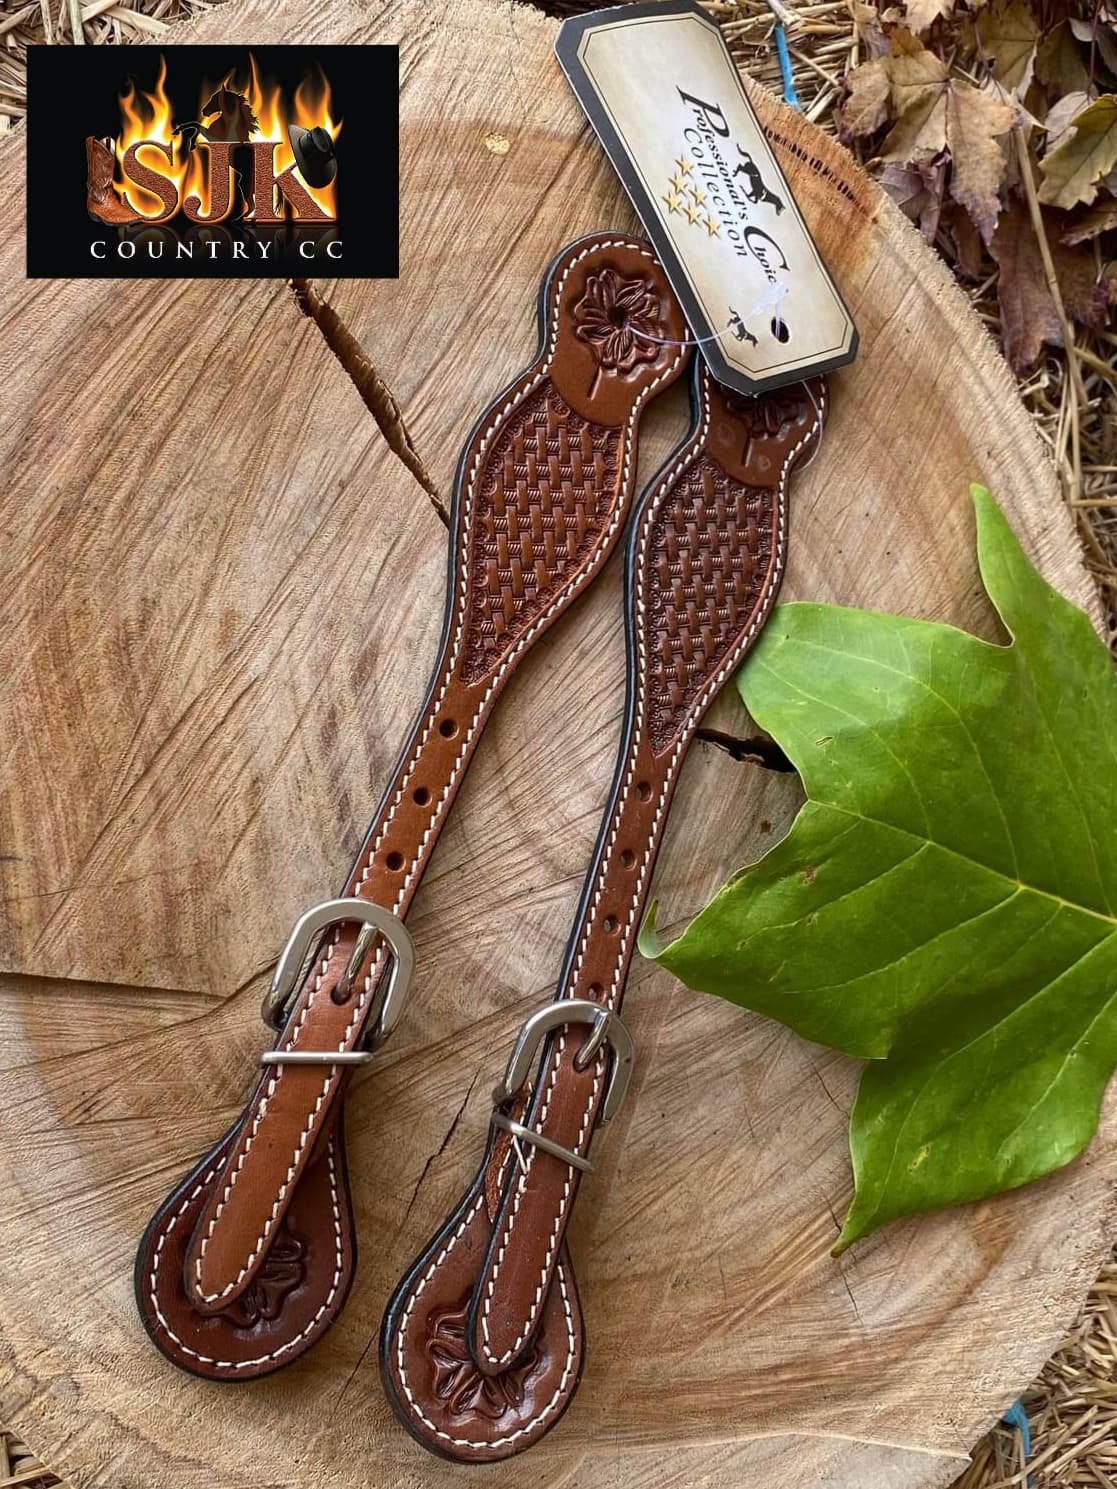 Strap -  Pro Choice Basketweave Tooled Leather Spur Straps